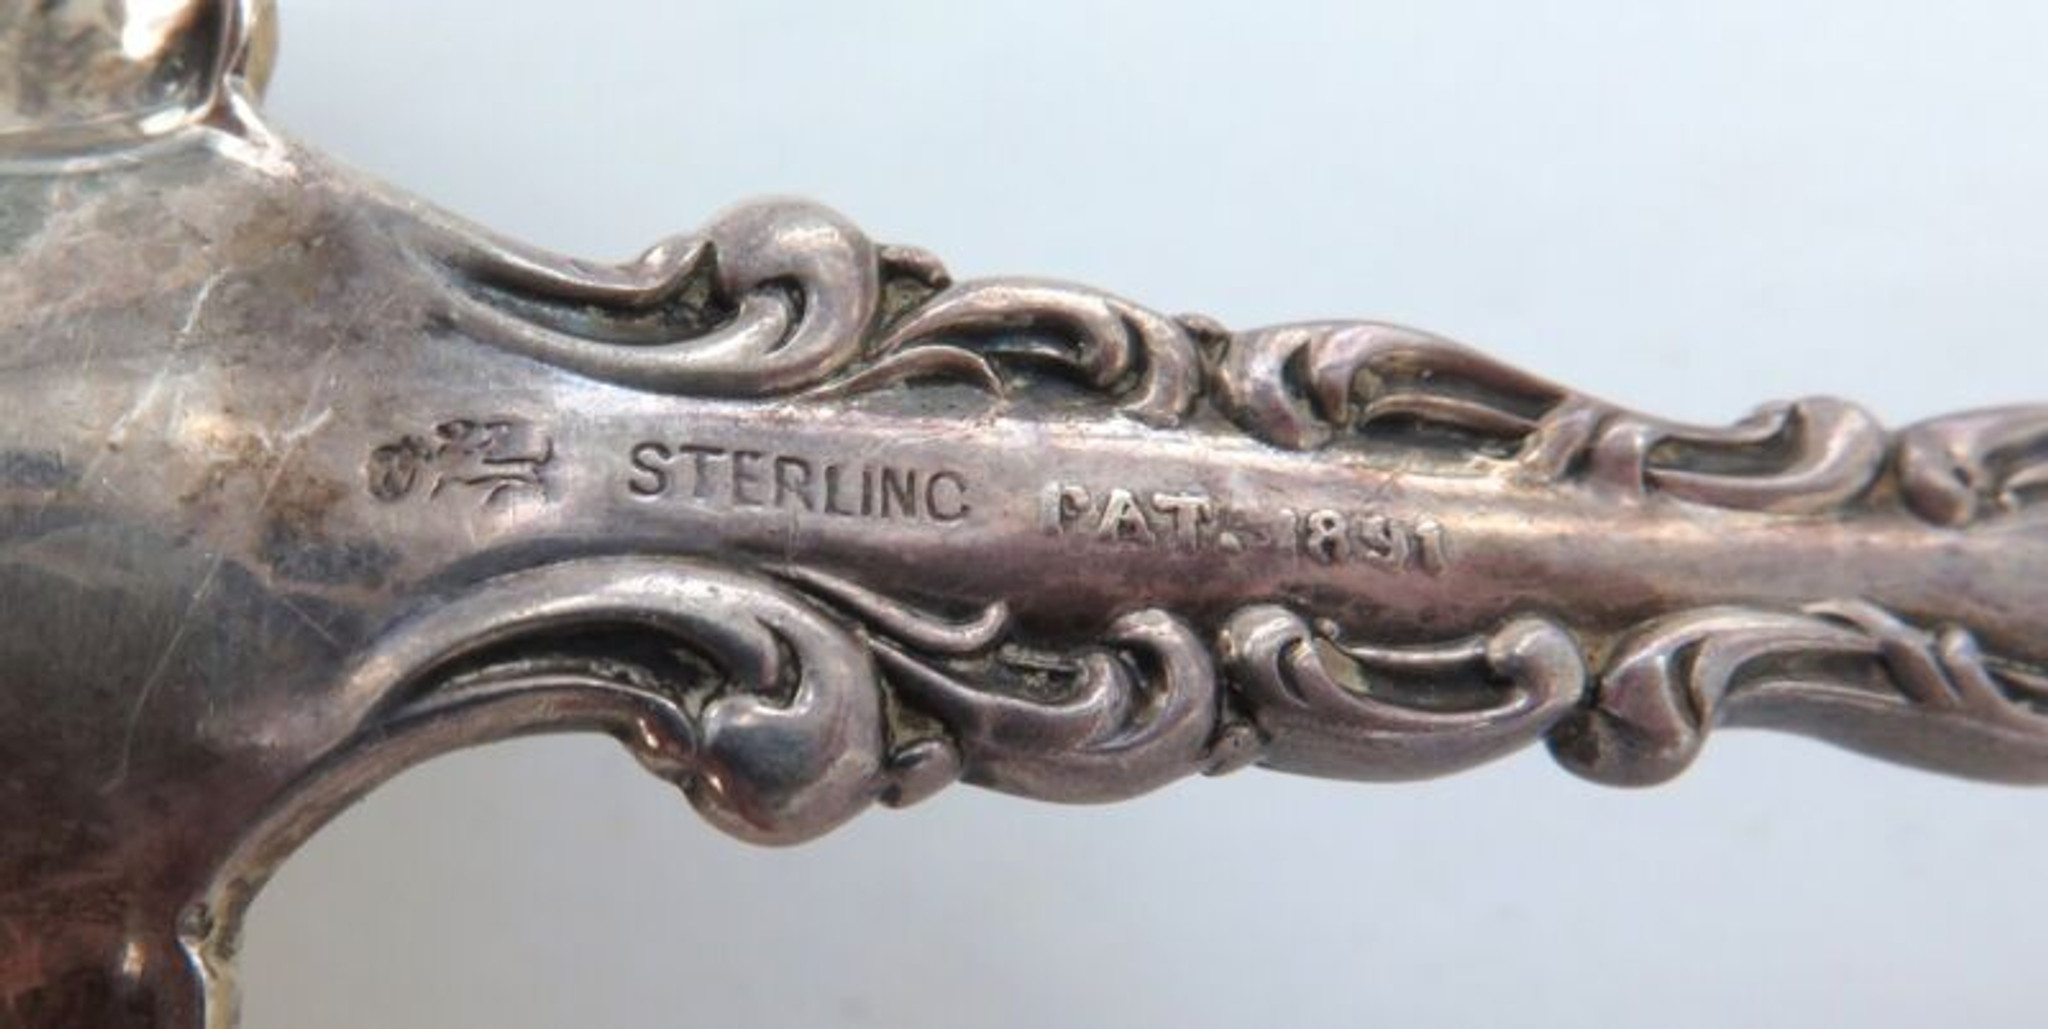 Late 1800s USA Whiting Manufacturing Co Large Louis XV” Sterling